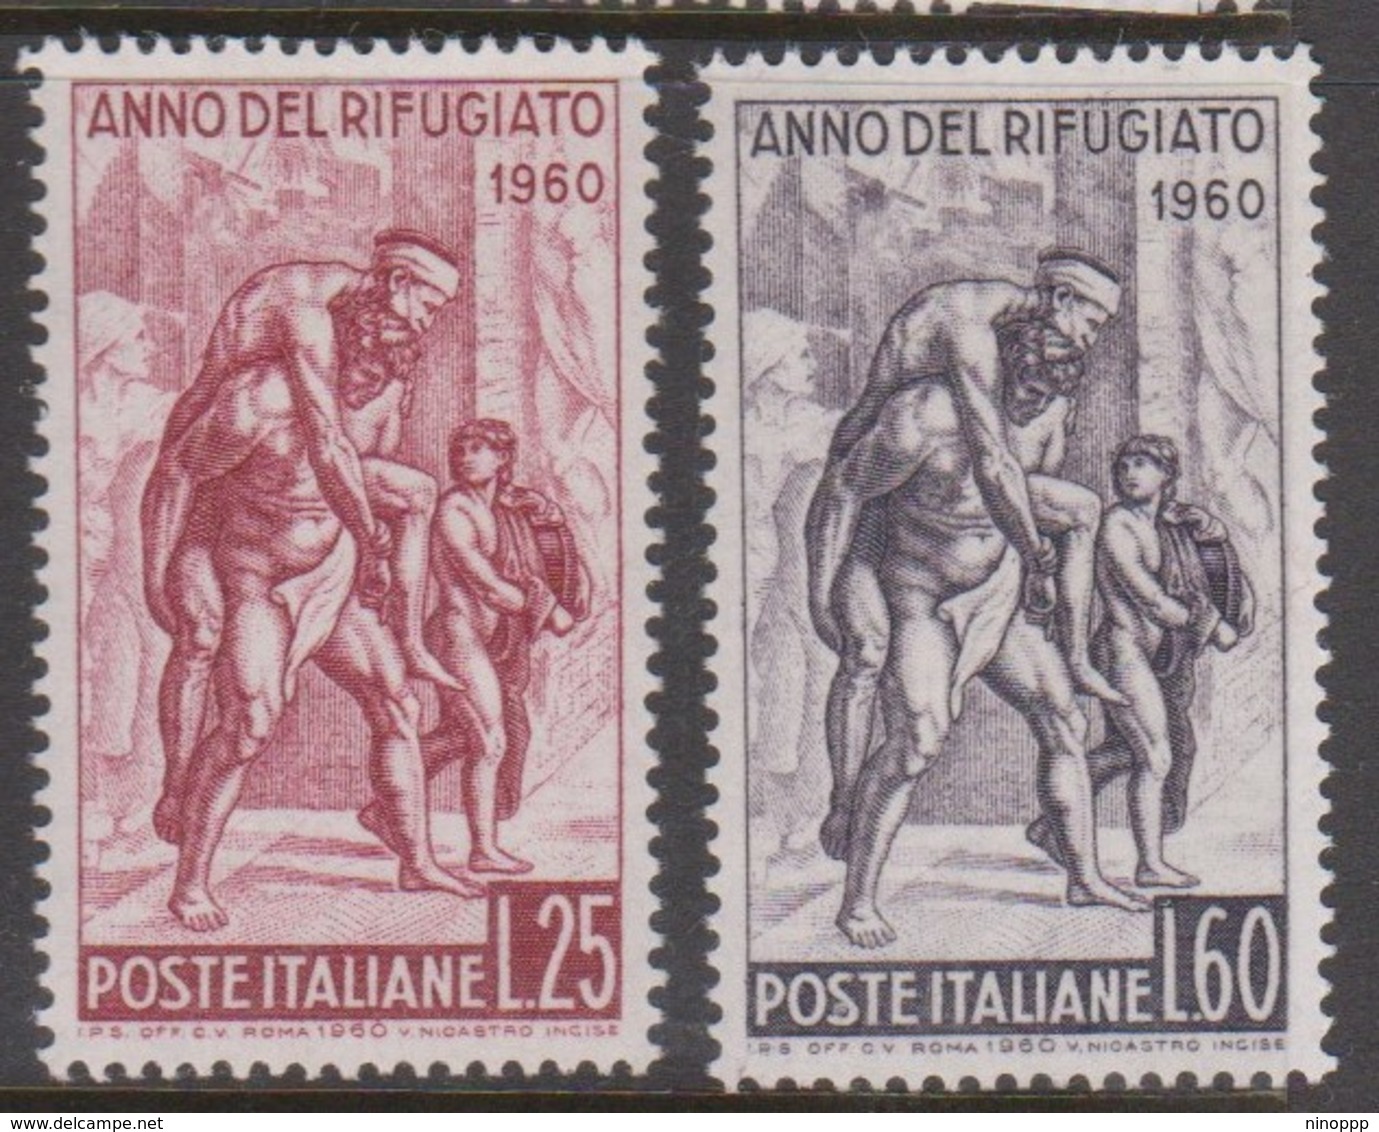 Italy Republic S 880-881 1960 Refugee Year,mint Never  Hinged - 1946-60: Mint/hinged